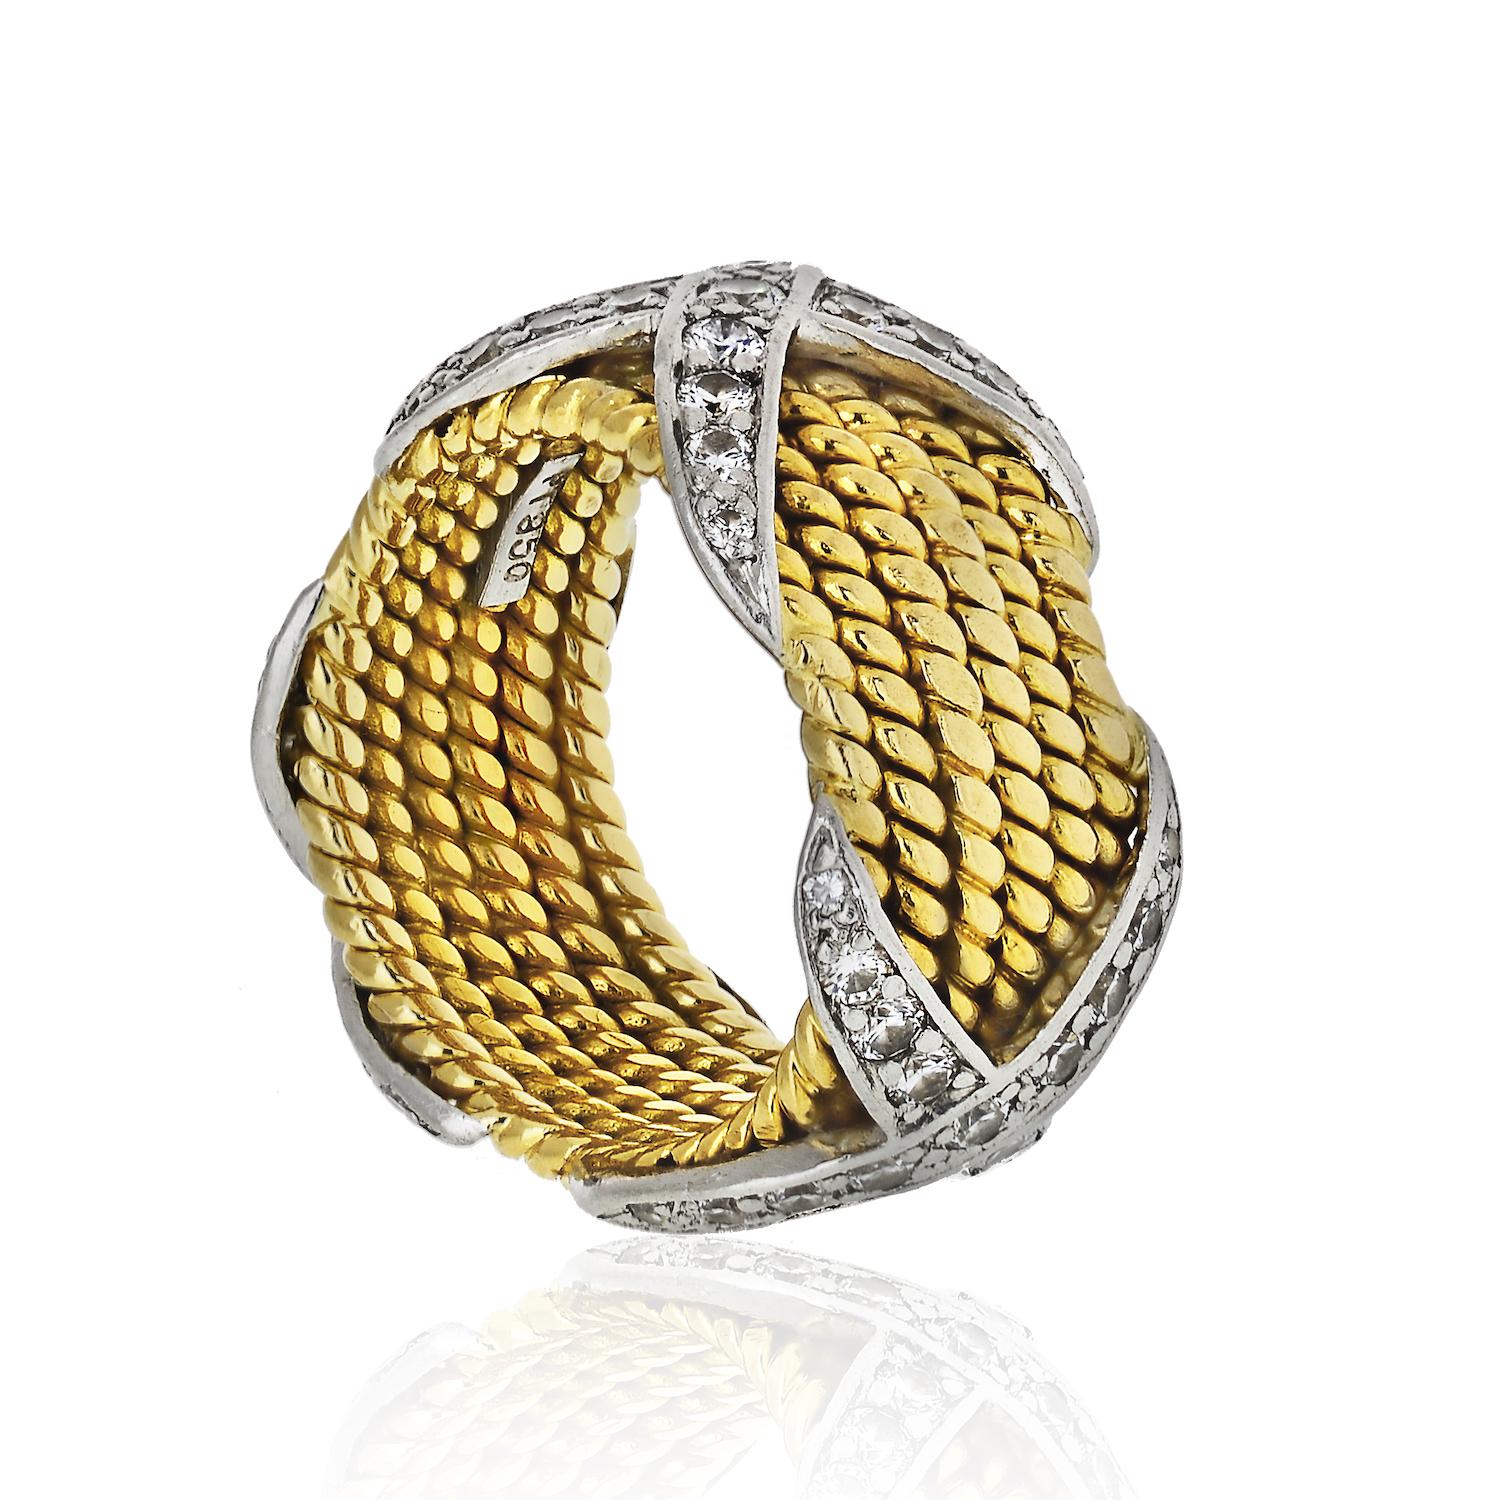 Tiffany Schlumberger X Six Row 5 Rope Ring 18K Yellow Gold Platinum.

Jean Schlumberger's visionary creations are among the world's most intricate designs.
Dazzling diamonds elegantly accentuate this ring's twisted wire design.
18k gold and platinum